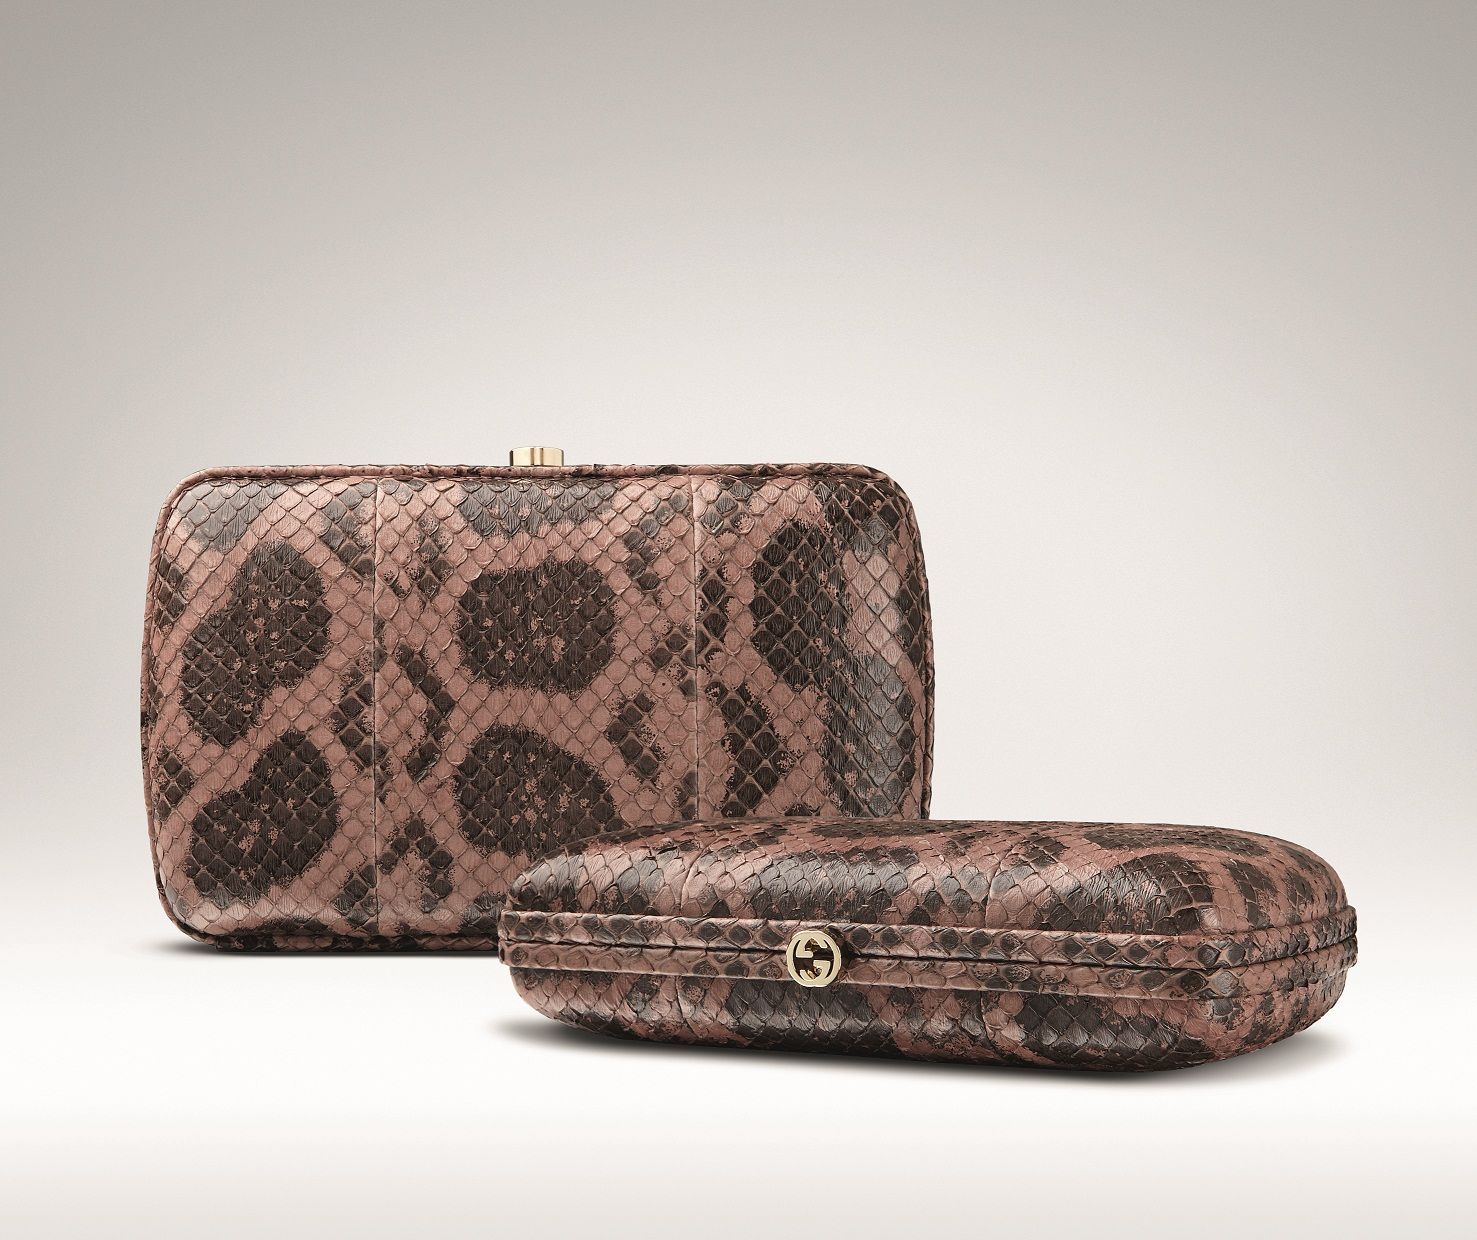 Gucci’s Limited Edition Clutches for the Gurgaon Flagship Store…